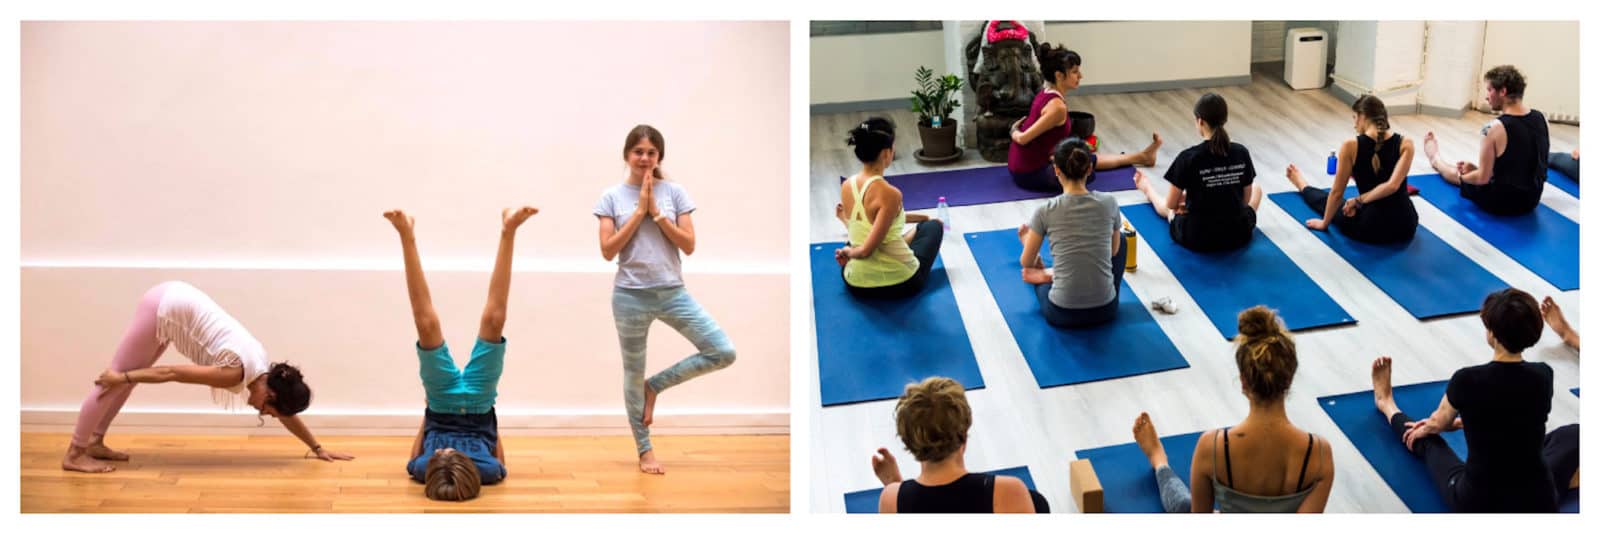 At kid-friendly Ashtanga Yoga studio in Paris, young yogis even have their own classes like these kids aged 6 to 11.